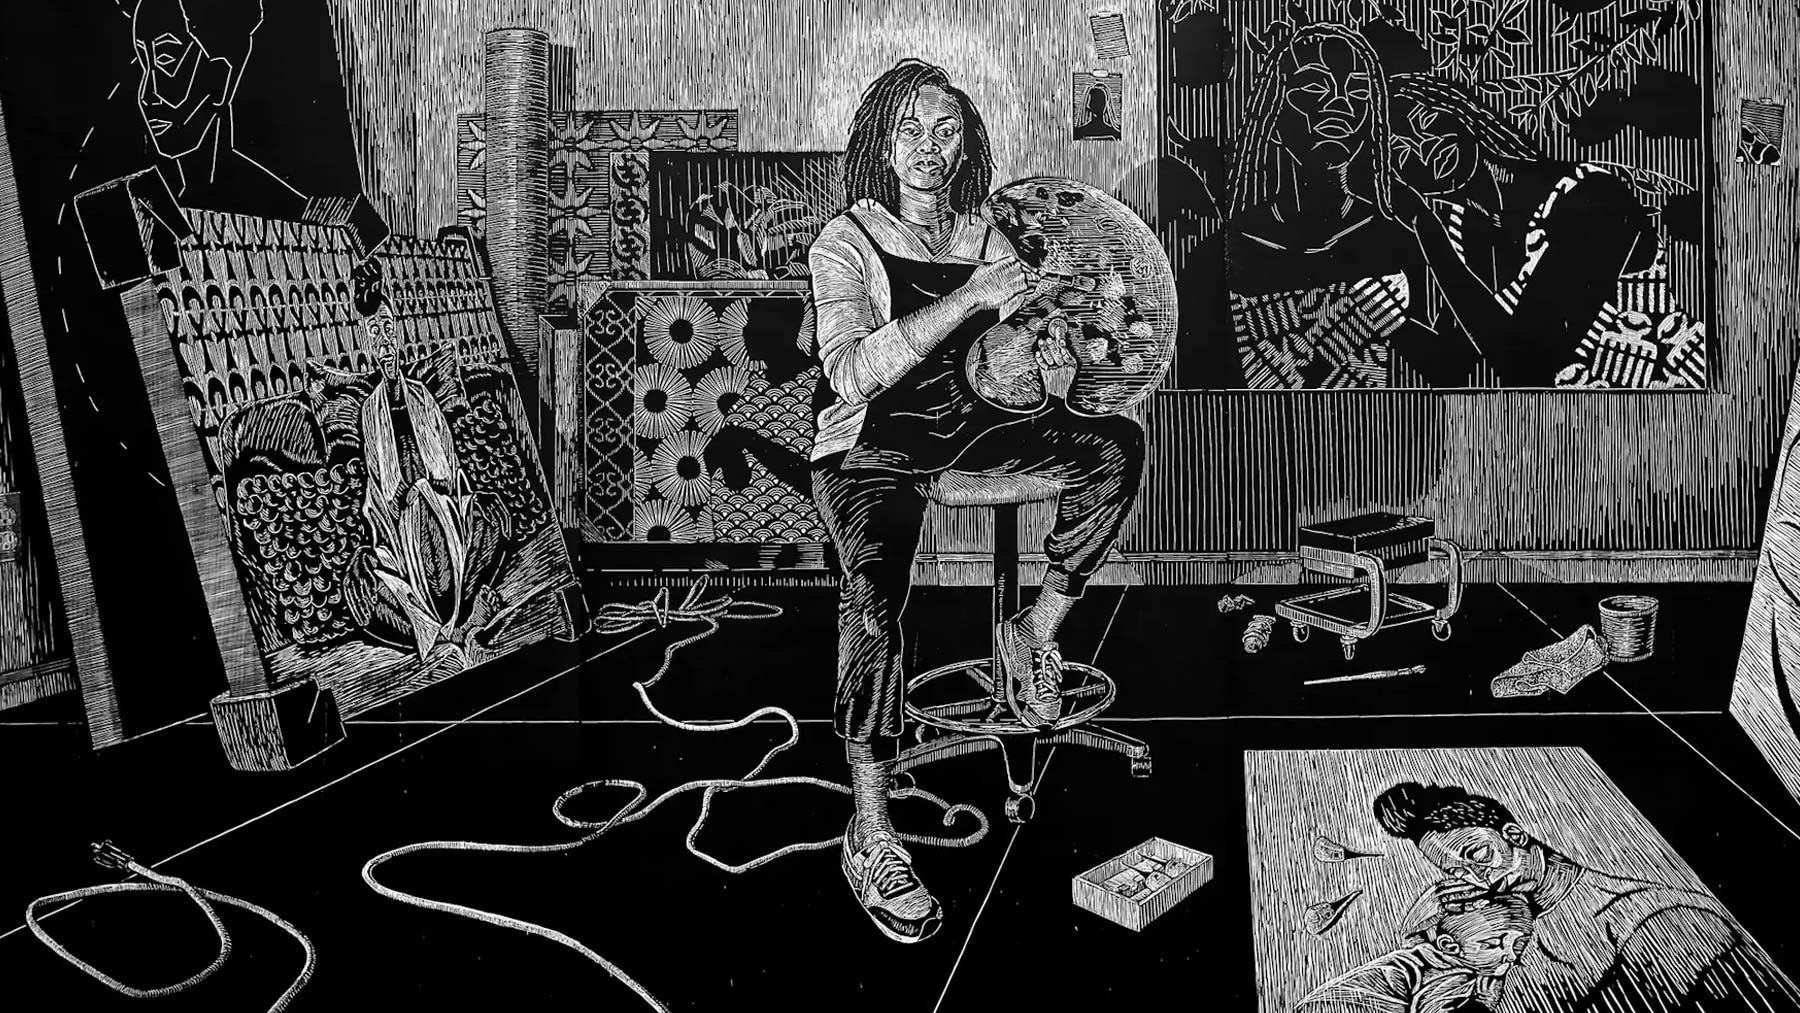 LaToya M. Hobbs, detail of The Studio from the series Carving Out Time